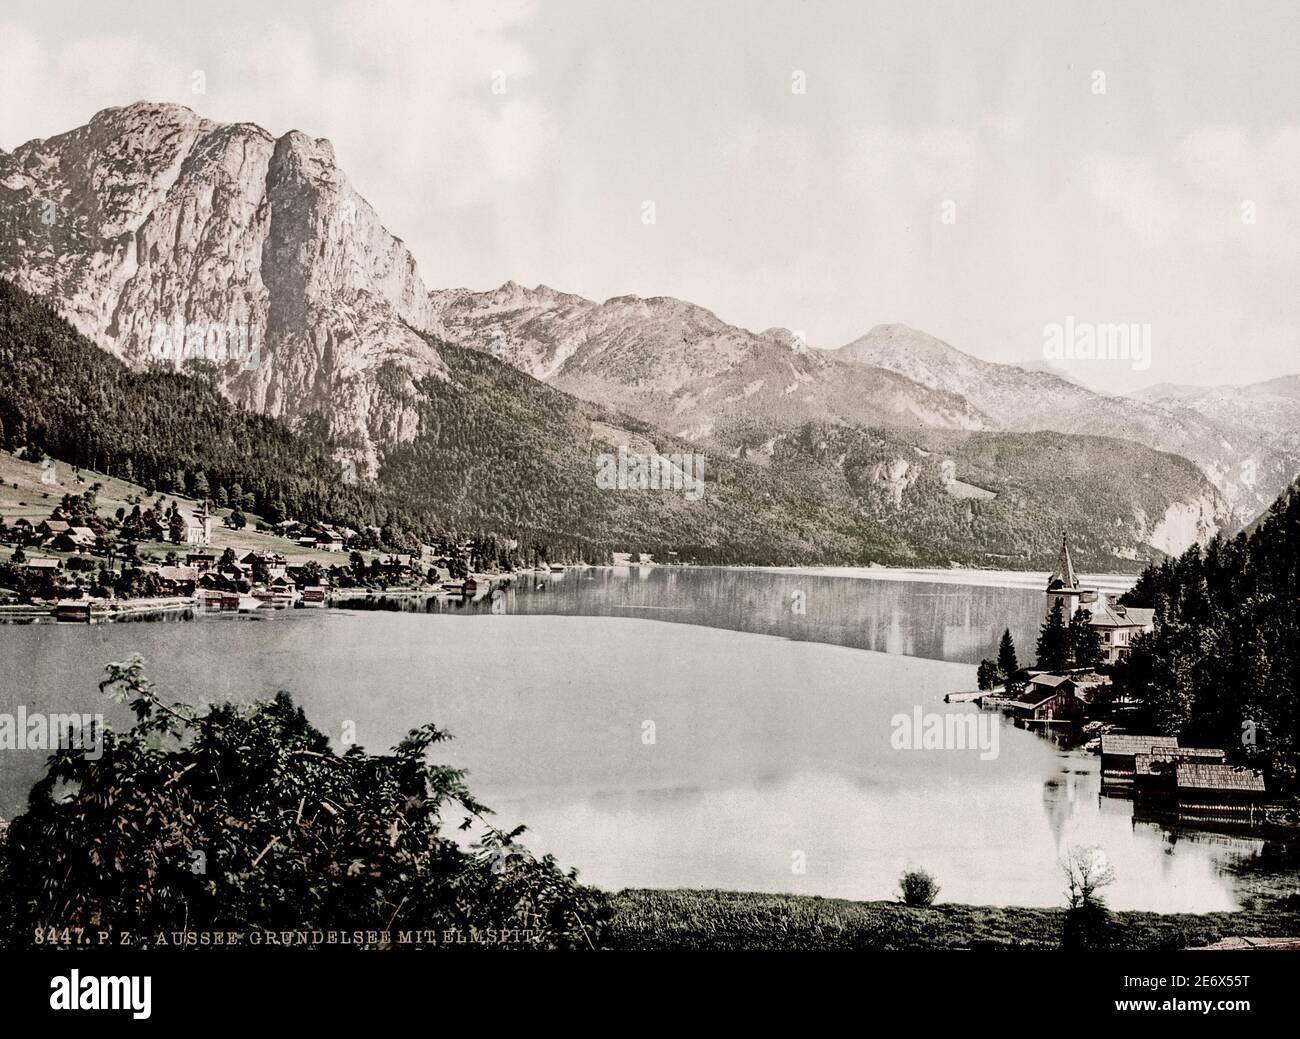 Vintage 19th century / 1900 photograph: Grundlsee, a municipality in the Liezen District of Styria, Austria. Stock Photo